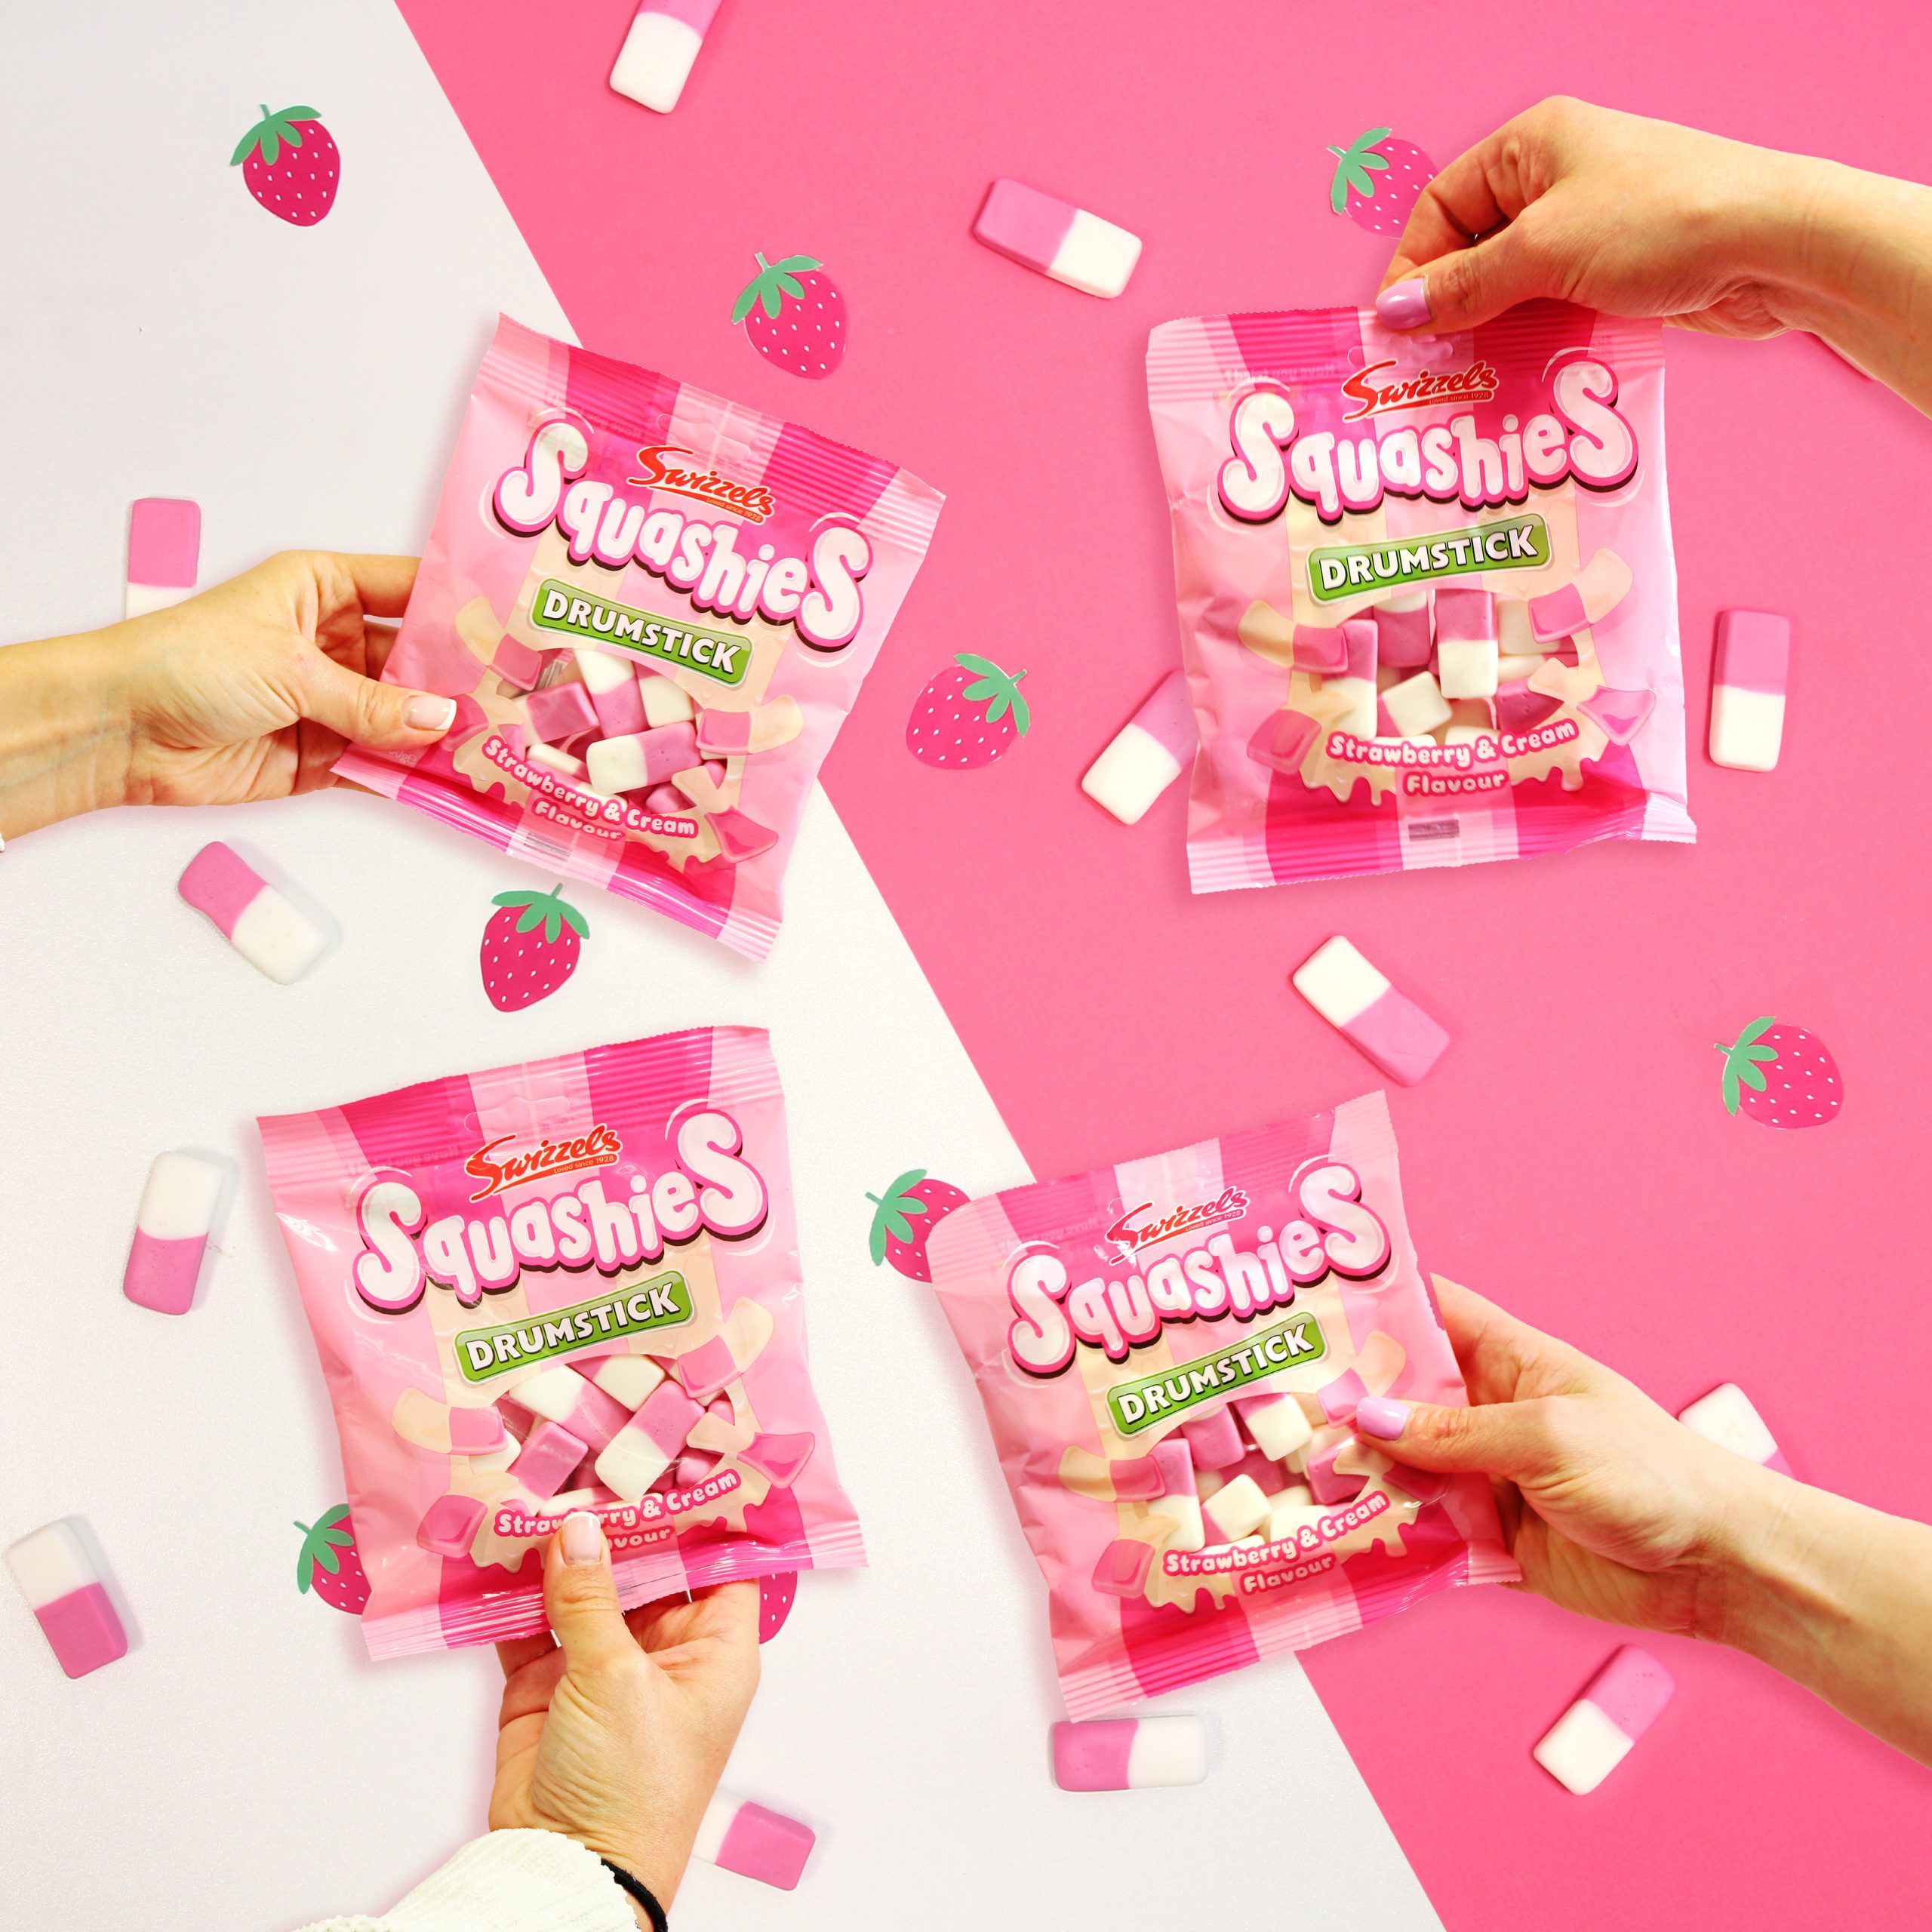 Swizzels Squashies Strawberry & Cream now available to UK retailers